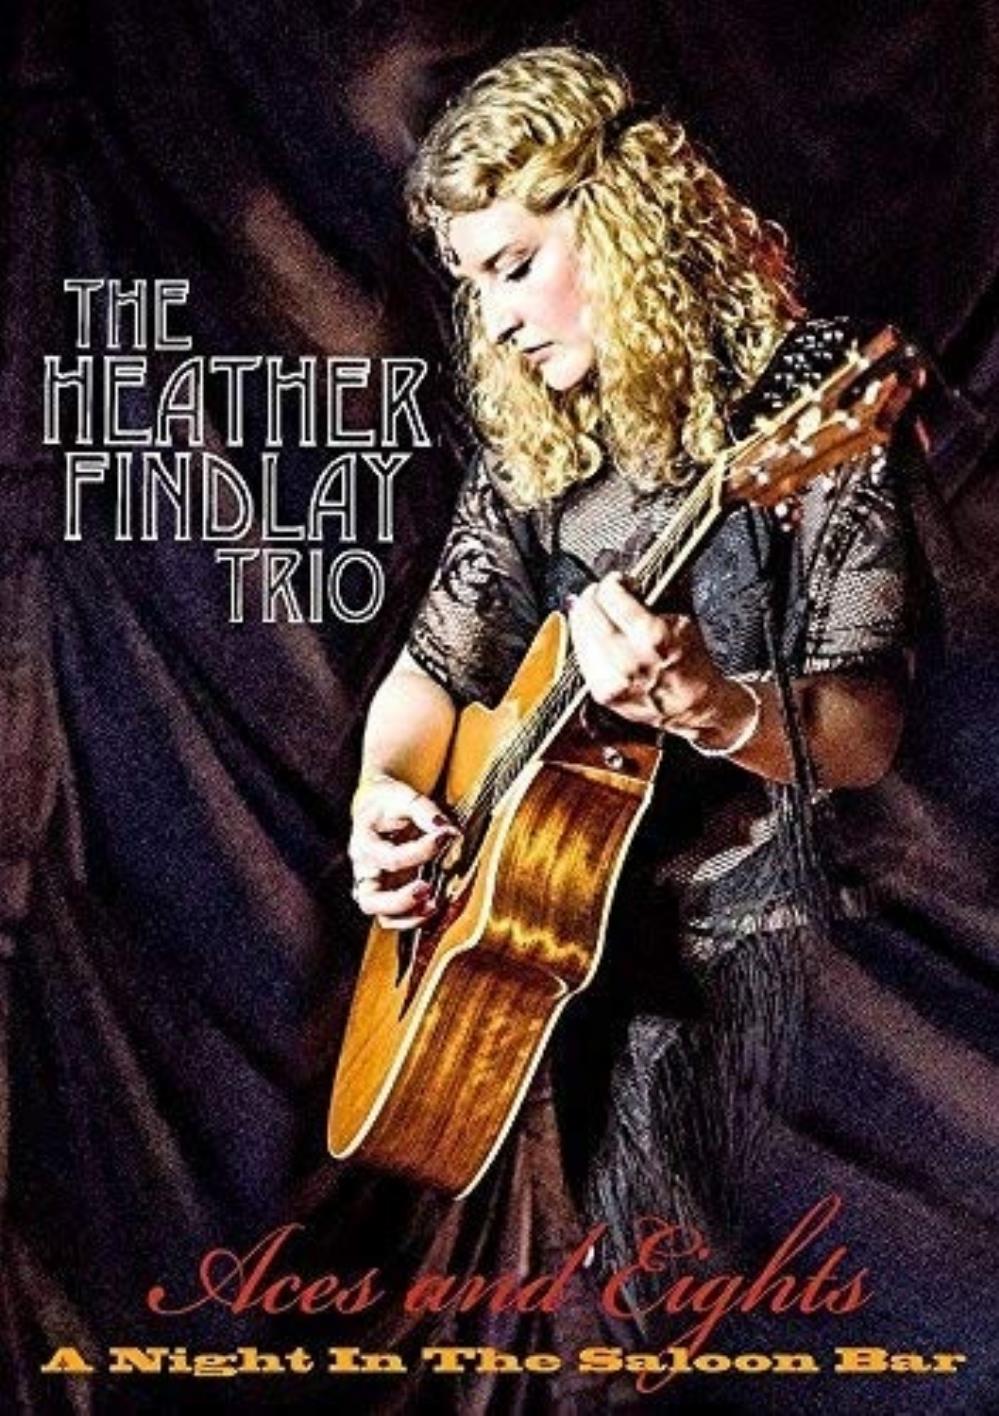 Heather Findlay The Heather Findlay Trio: Aces and Eights - A Night In The Saloon Bar album cover